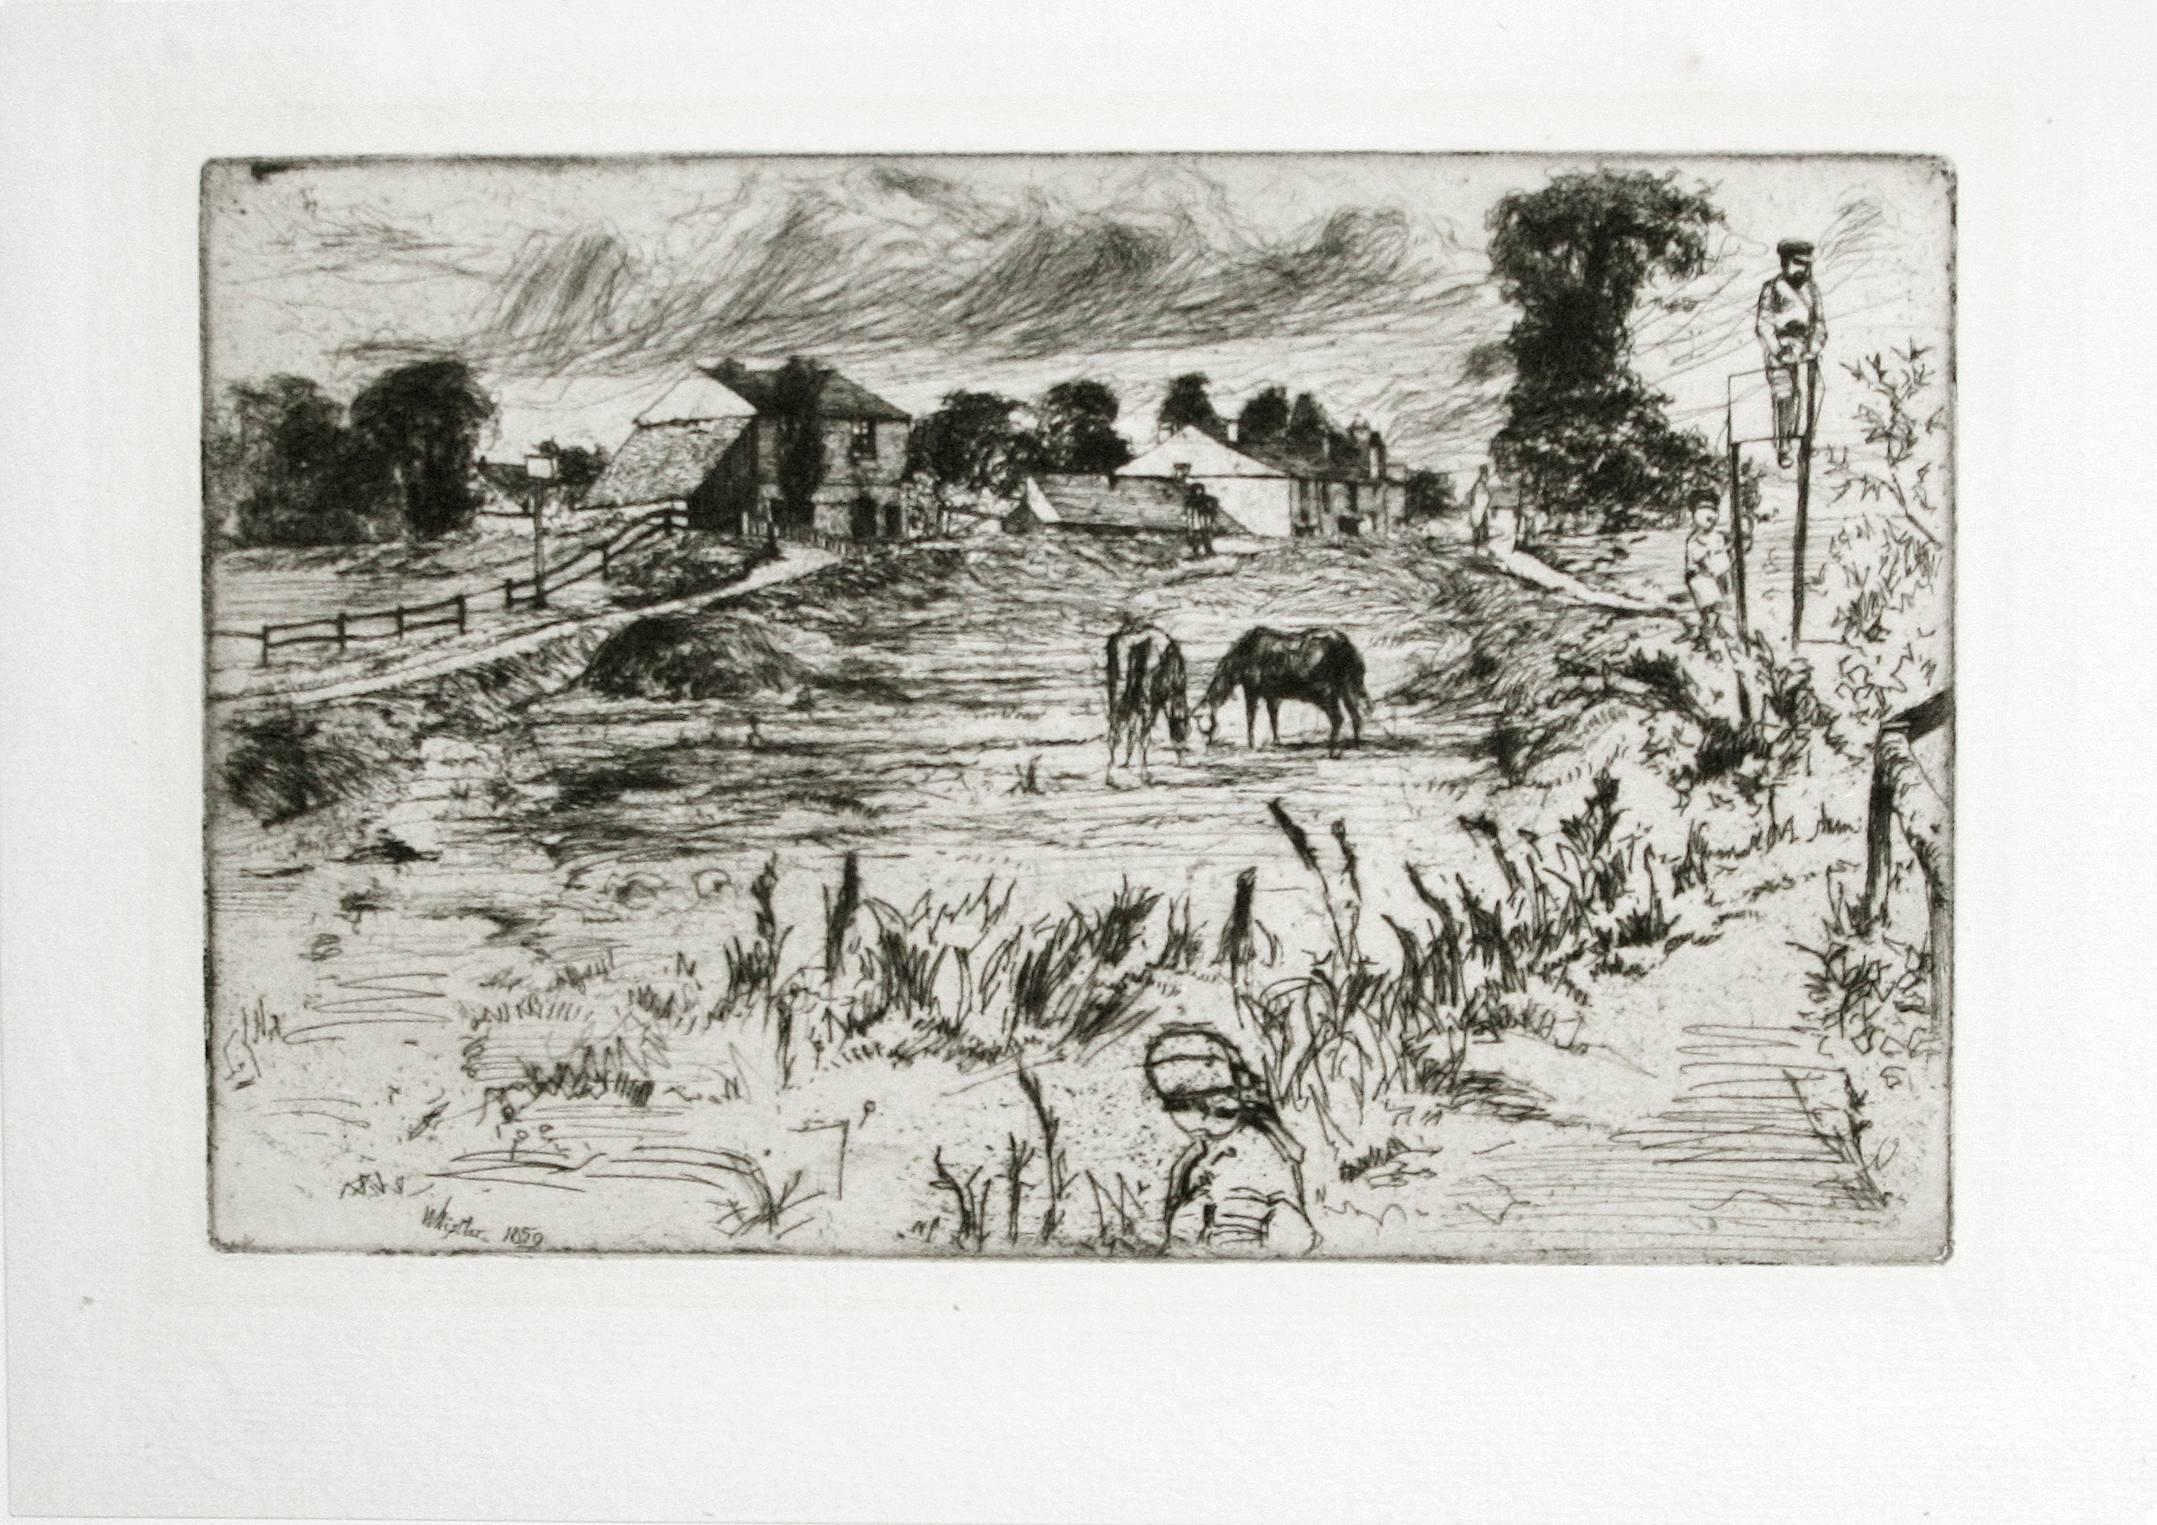 Landscape with Horses. - Print by James Abbott McNeill Whistler